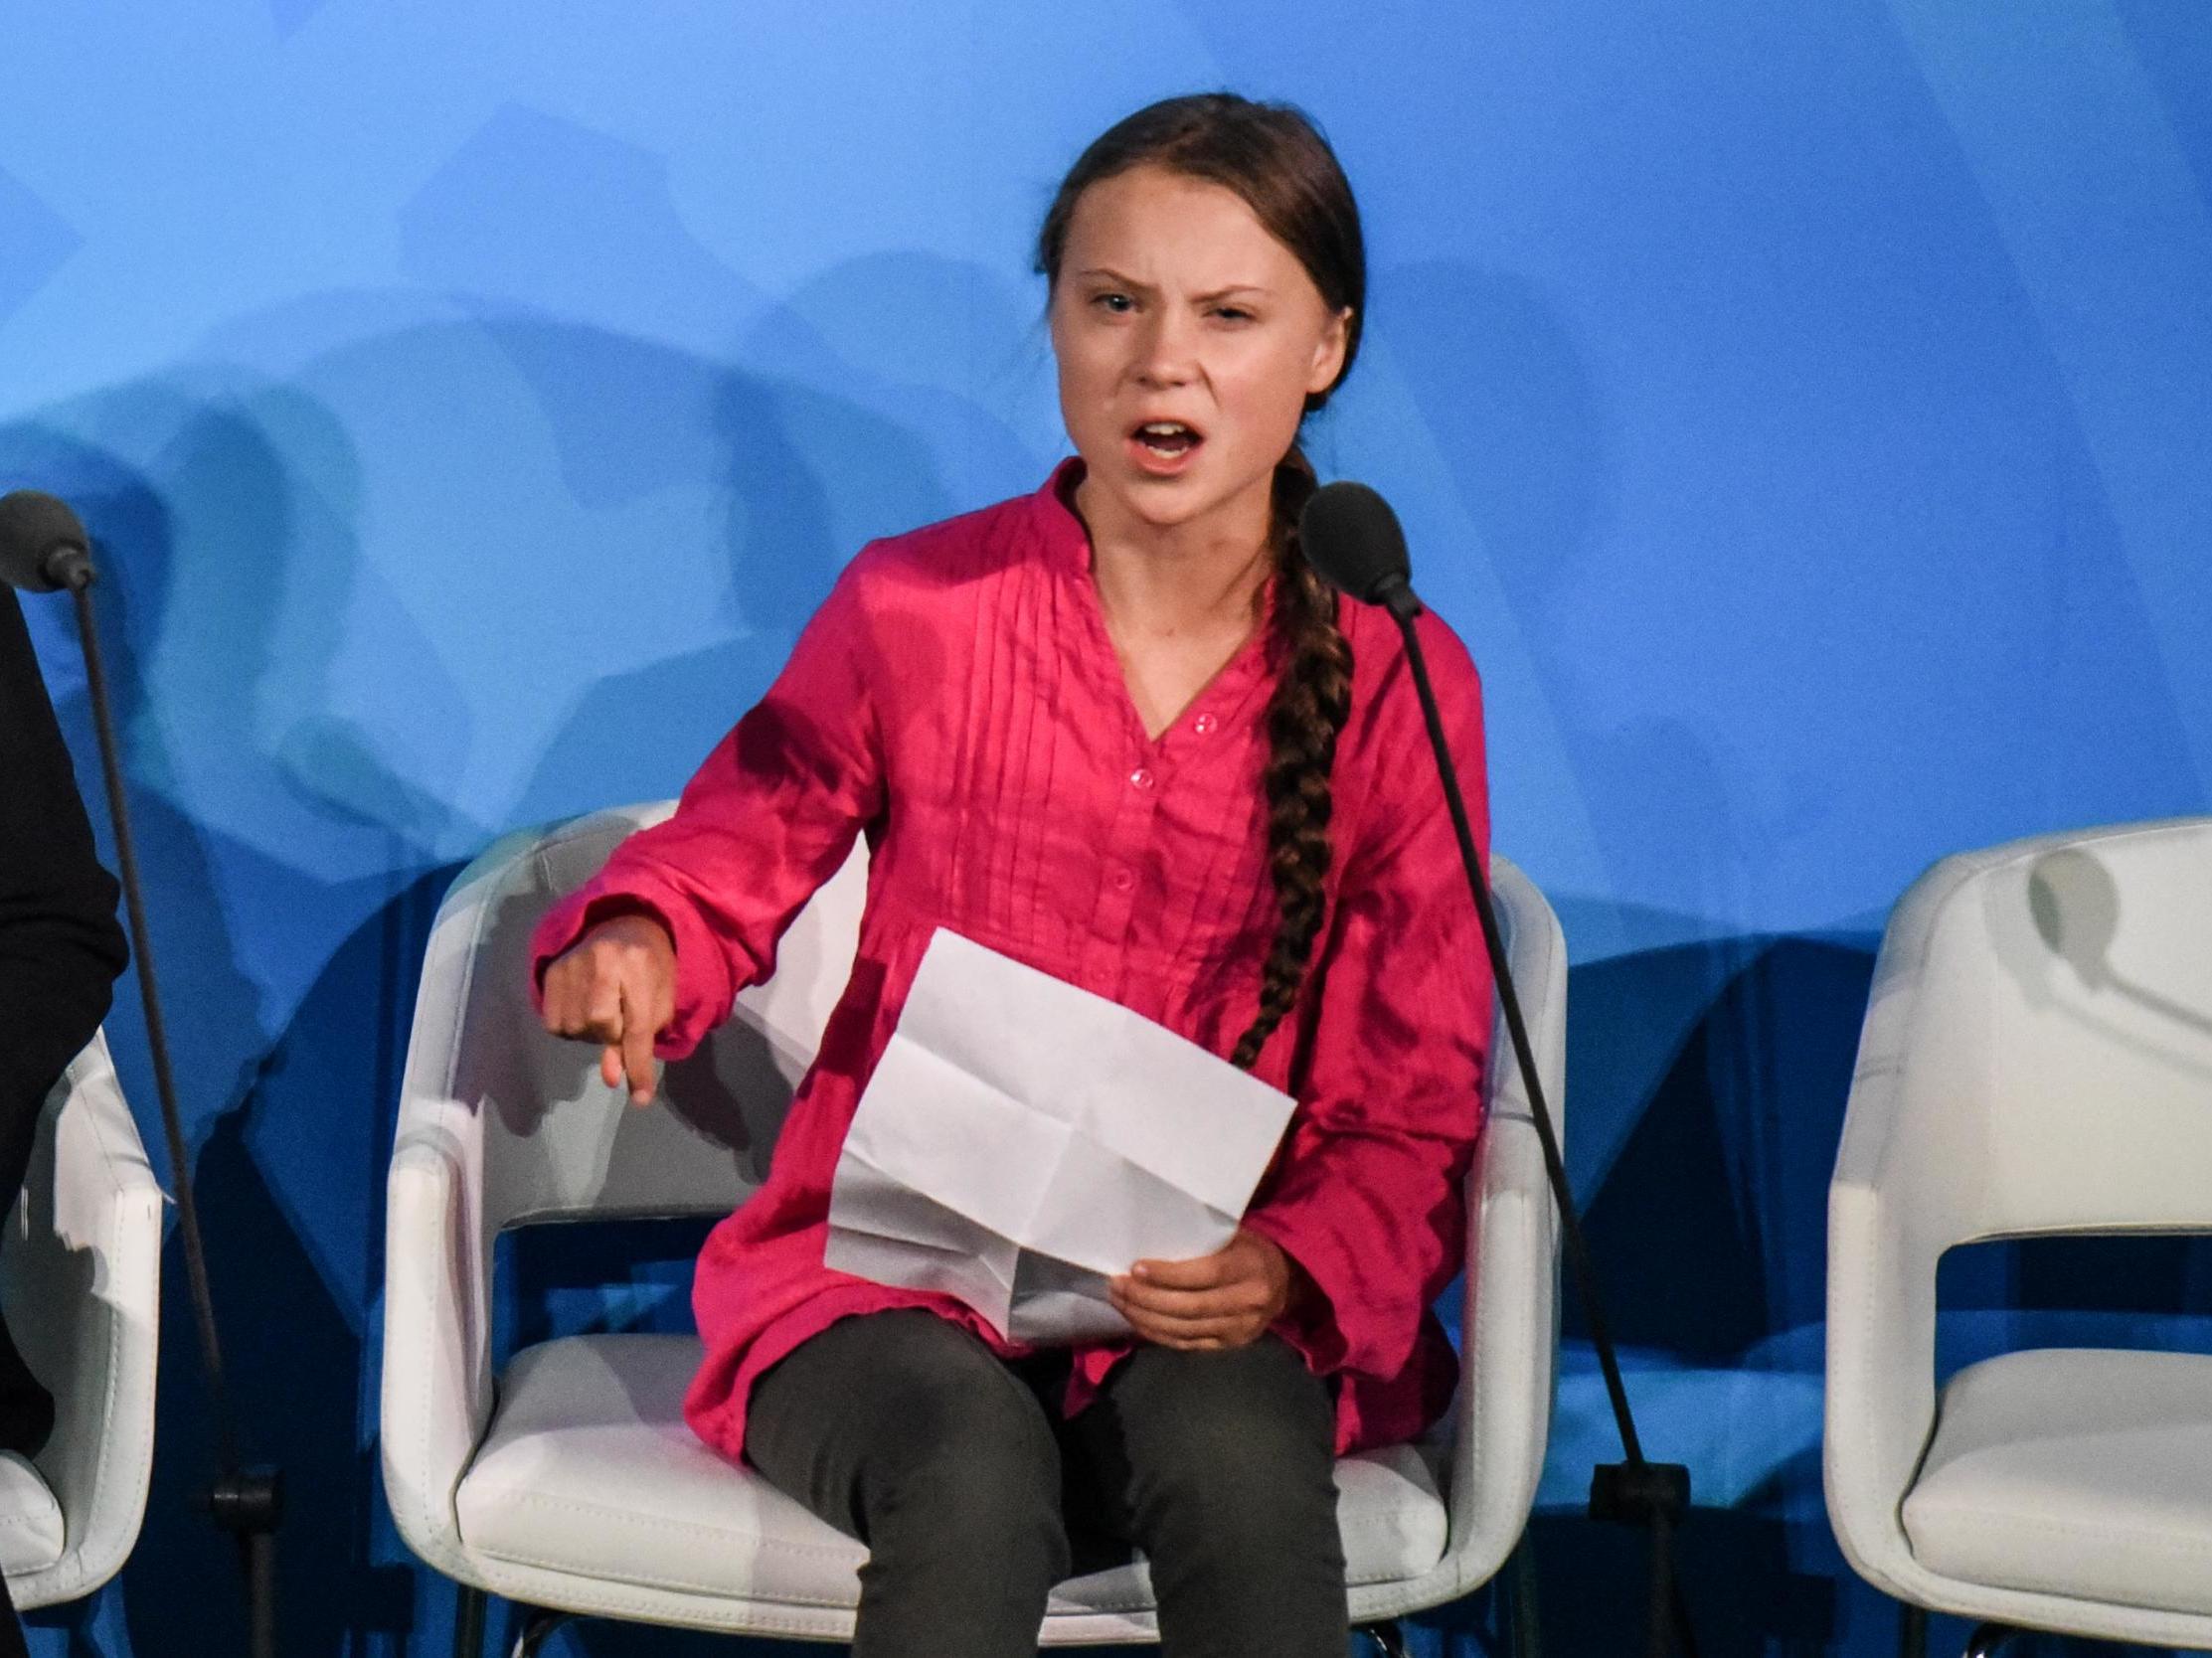 50 Years Old English Woman - Greta Thunberg faces the vitriol of men because she's a 16 ...